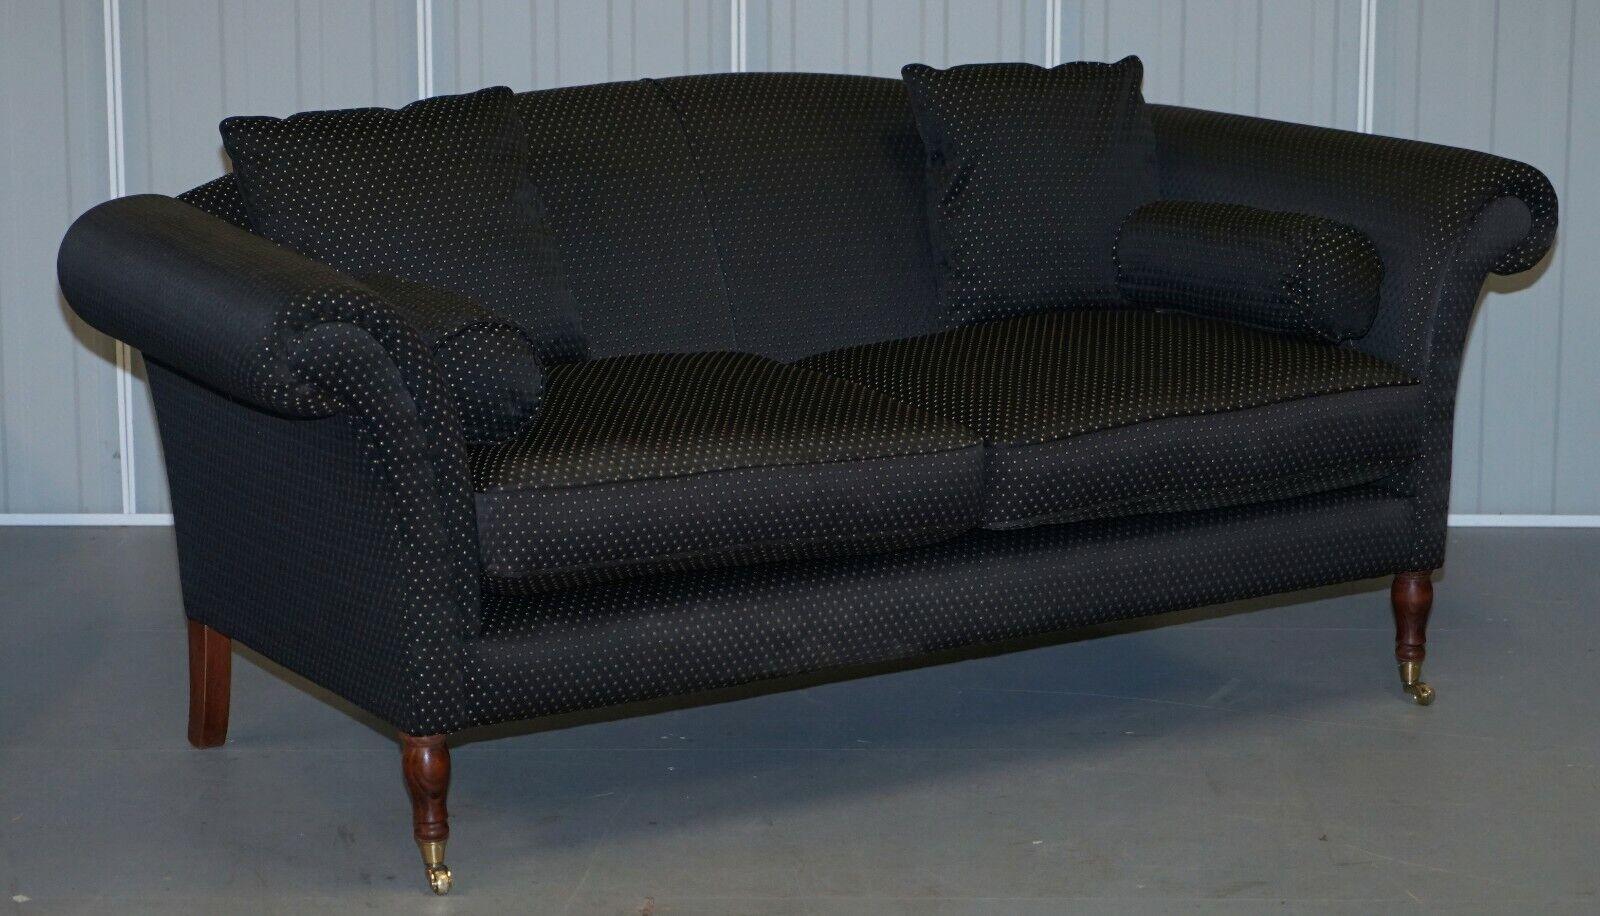 ROYAL HOUSE ANTIQUES 

Royal House Antiques is delighted to offer for sale this lovely hand made in England Art Deco style three seat sofa which is part of a suite

Please note the delivery fee listed is just a guide, it covers within the M25 only,